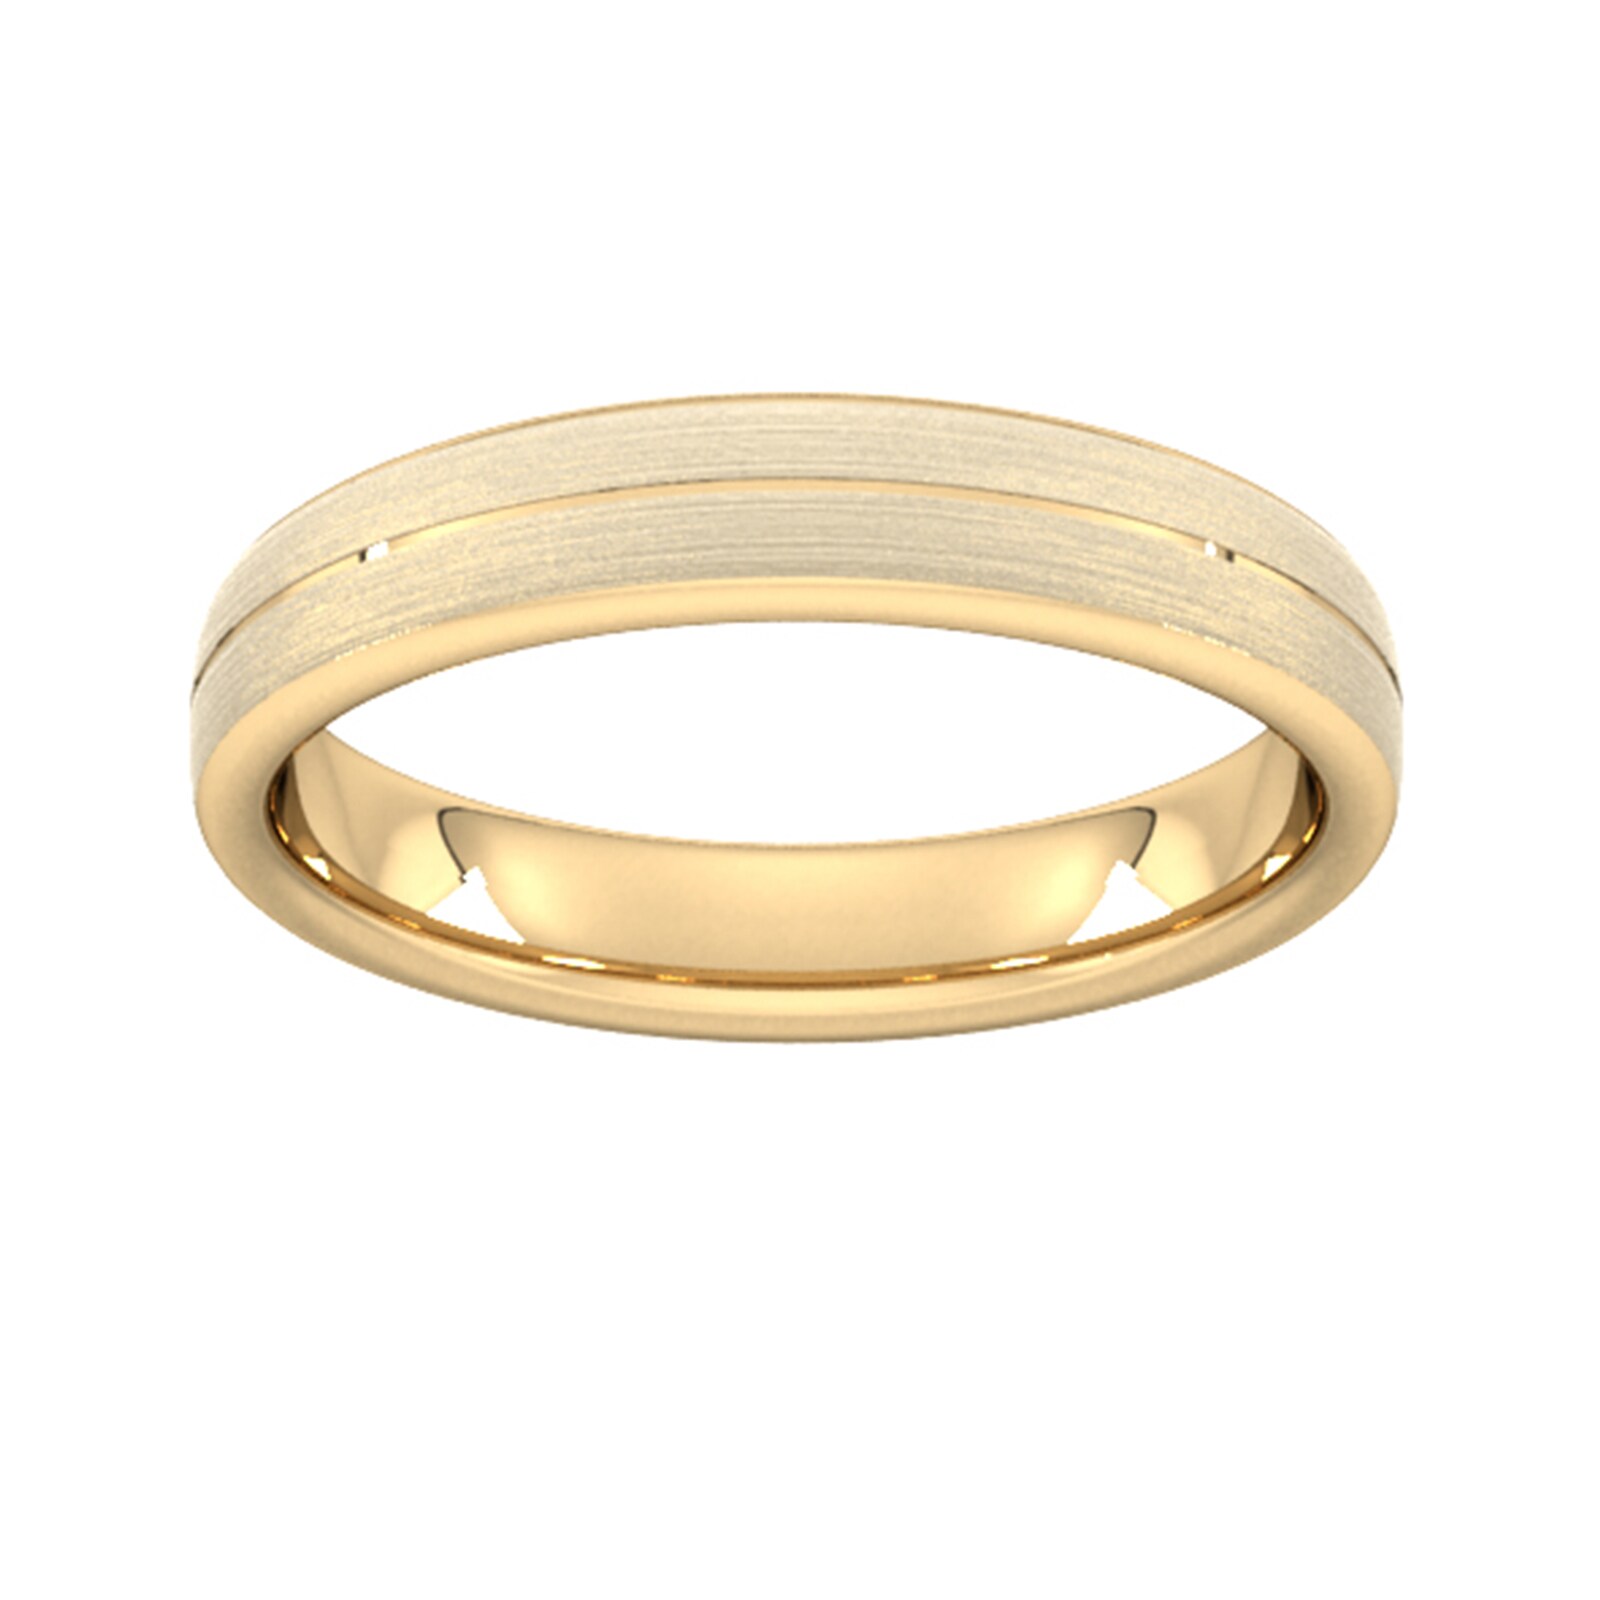 4mm Traditional Court Standard Centre Groove With Chamfered Edge Wedding Ring In 18 Carat Yellow Gold - Ring Size J